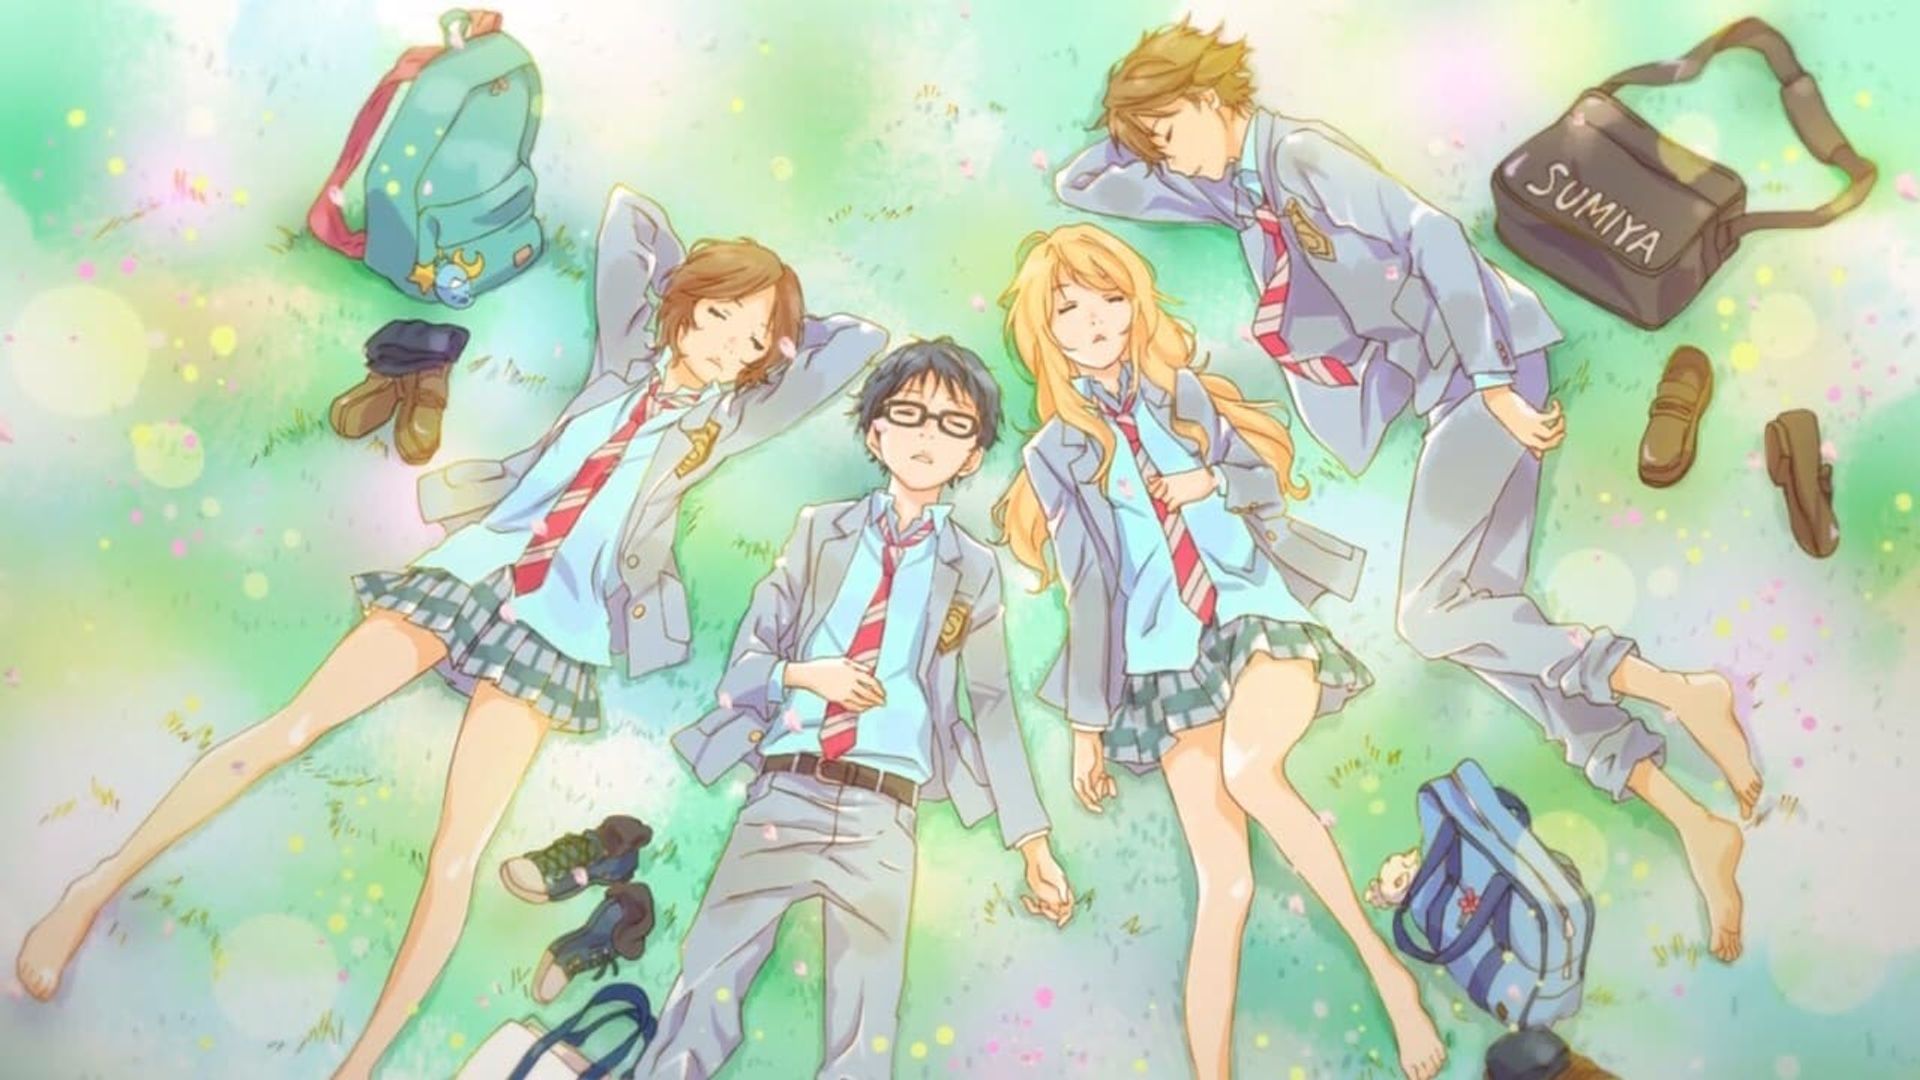 Your Lie in April - Watch Episodes on Hulu, Crunchyroll Premium,  Funimation, and Streaming Online | Reelgood